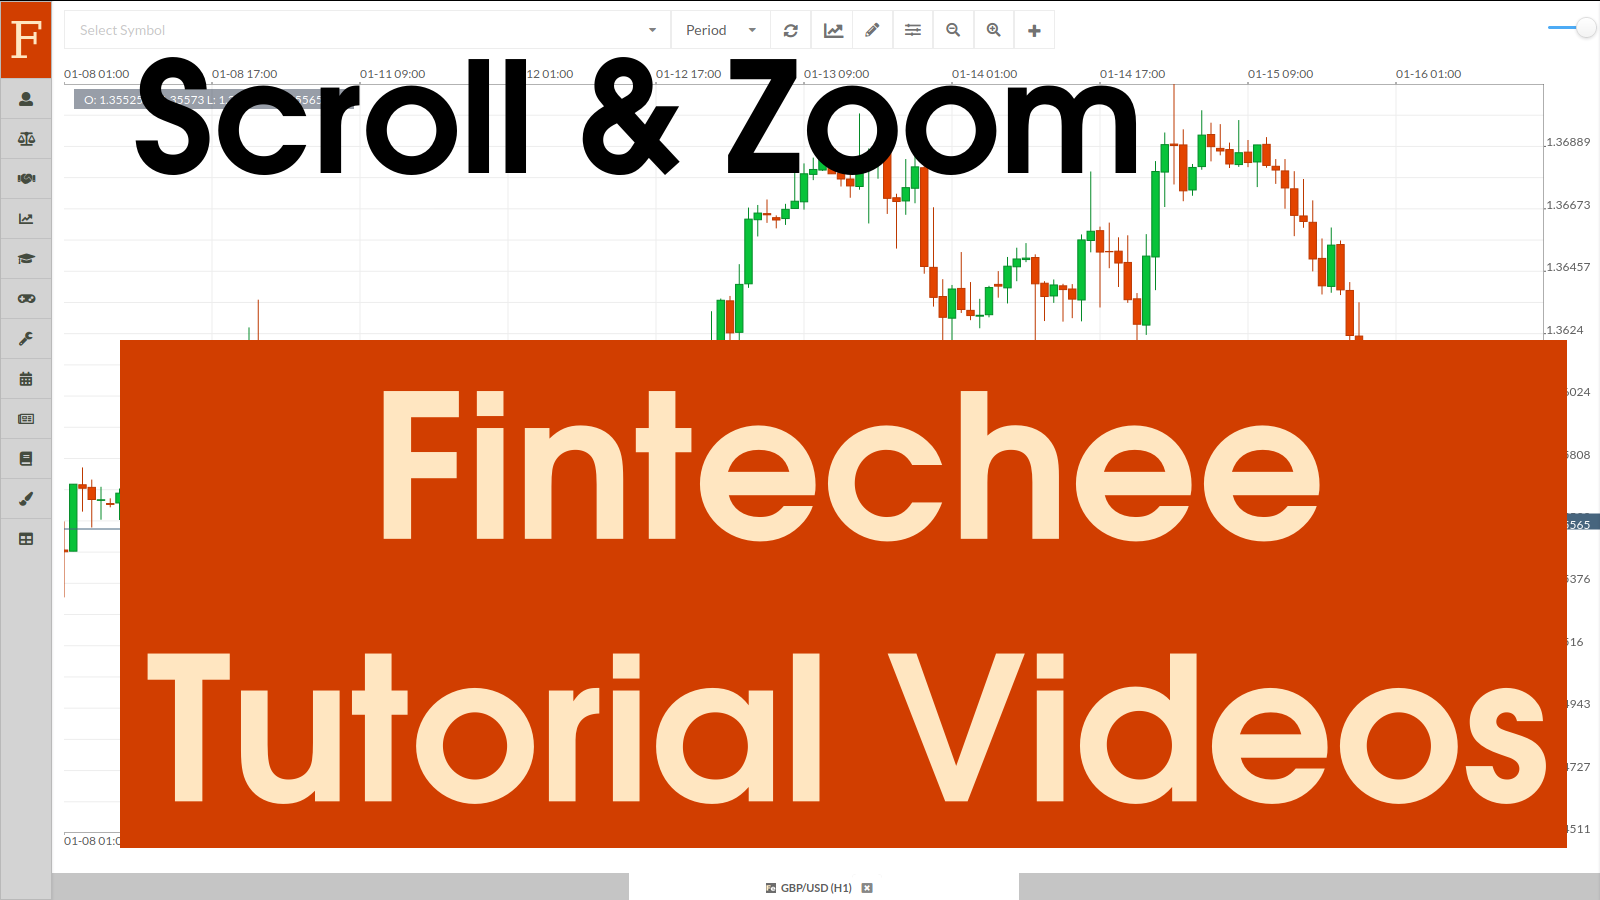 This tutorial video talks about how to scroll the chart and how to zoom in/out via Fintechee WEB Trader